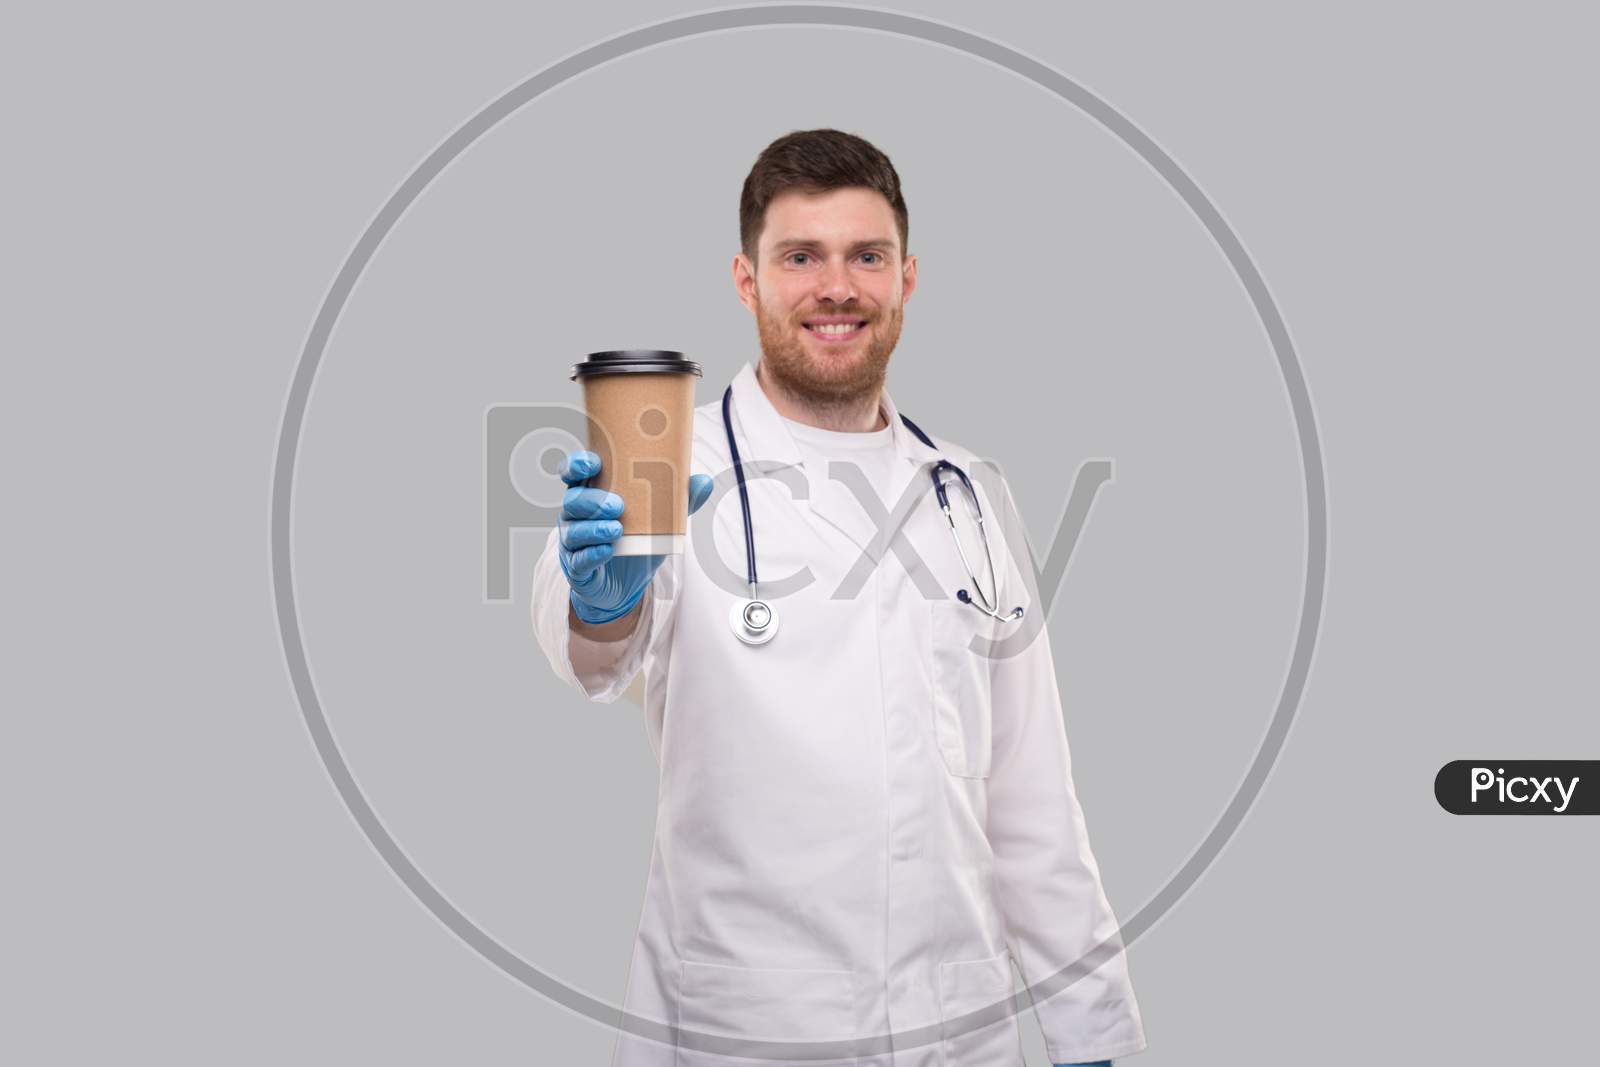 Doctor Showing Coffe To Go Cup Wearing Gloves And Smiling Isolated